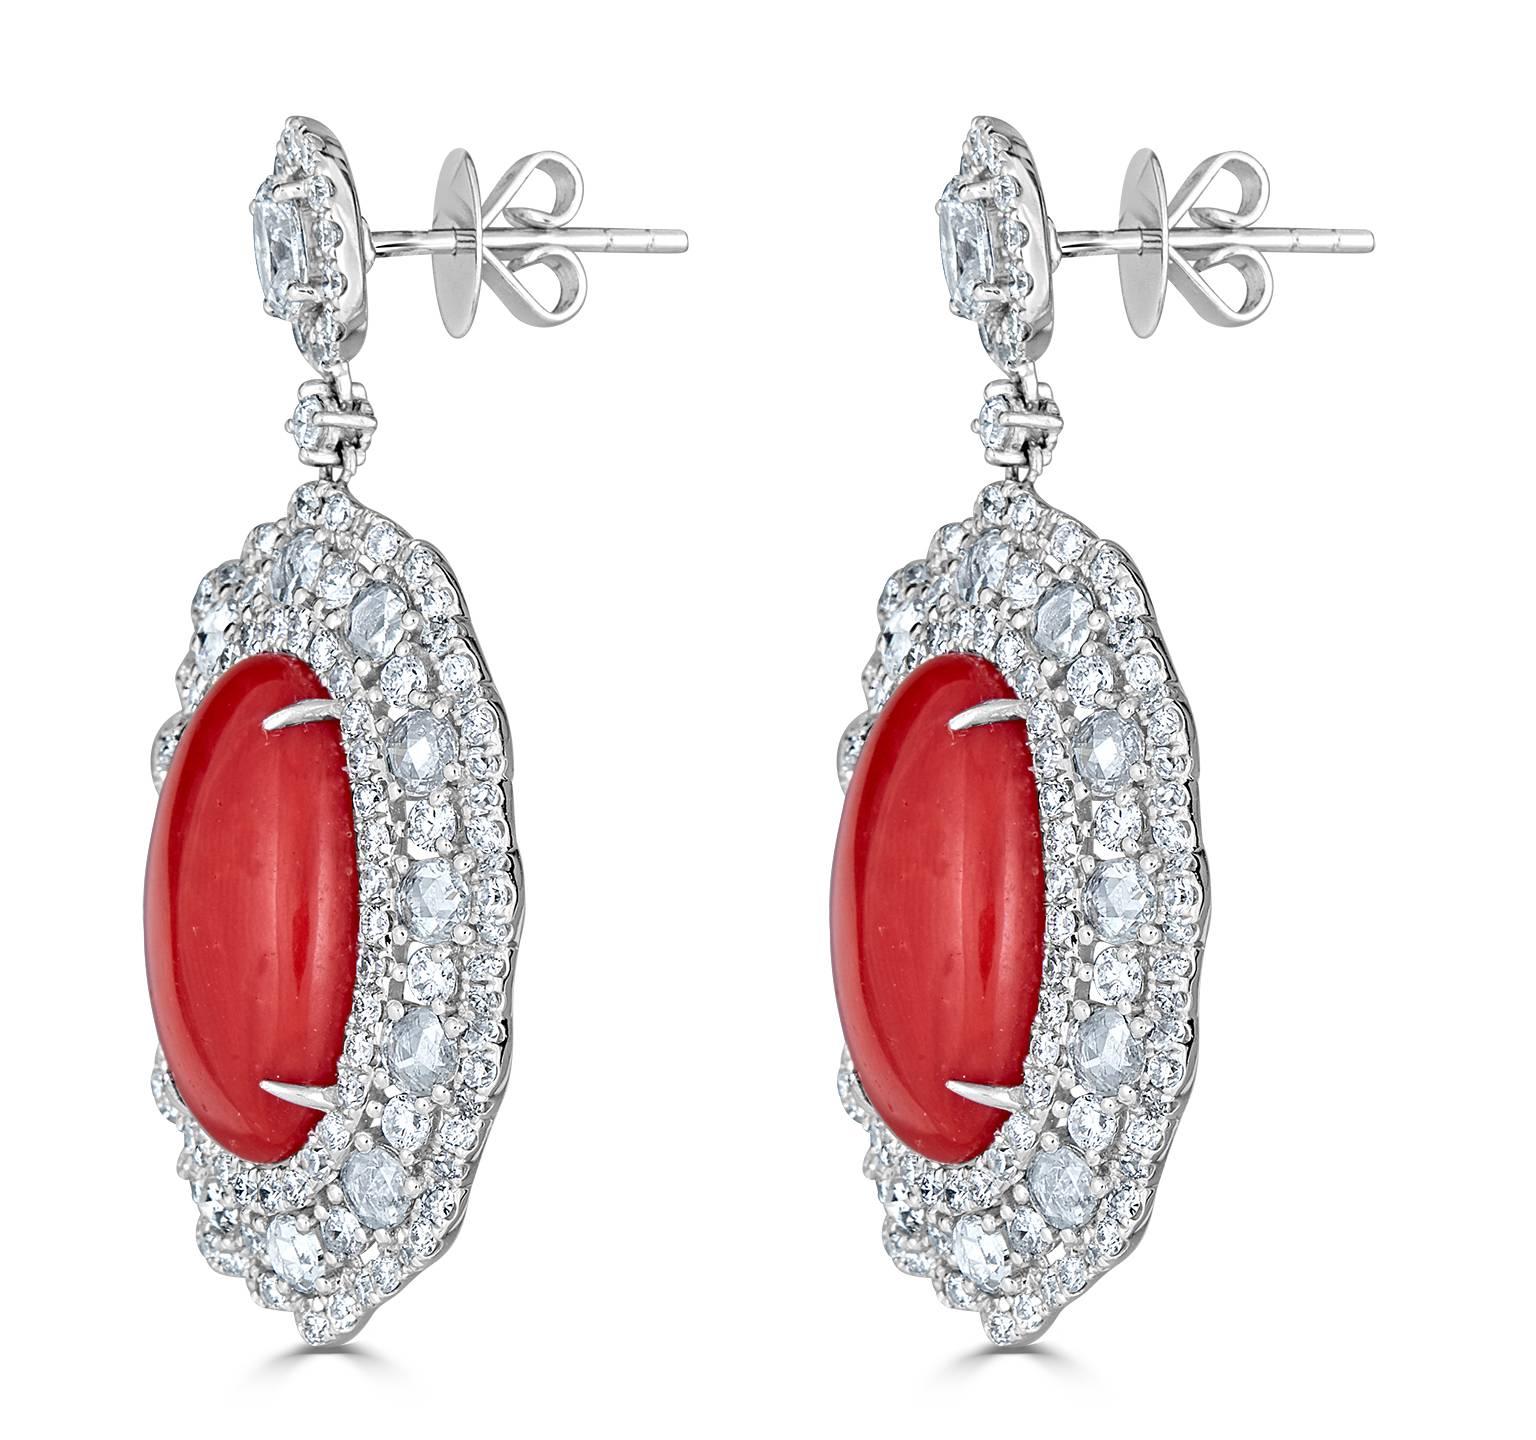 Smart and fashionable.  The rich color of this natural red coral is out of this world!  The white diamond setting complements perfectly with the natural red coral.  Post / Clutch Back

Diamond approx. - 5.60tcw
Red Coral approx. - 12.90tcw
Length -